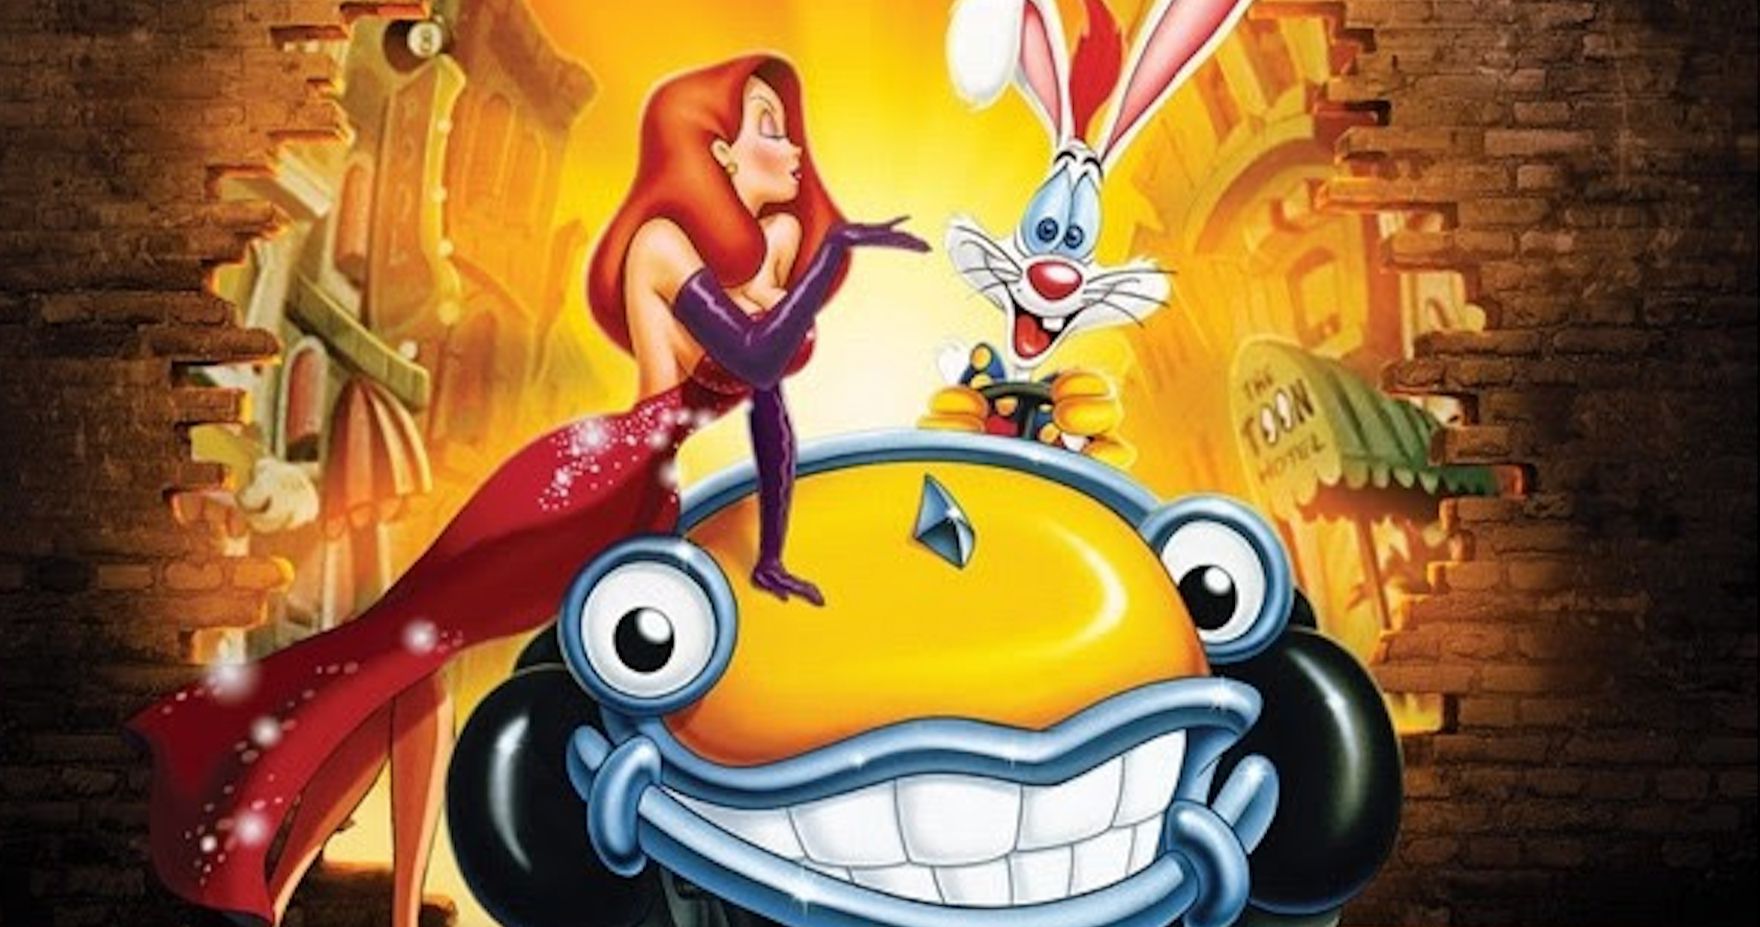 Who Framed Roger Rabbit Arrives in 4K Ultra HD for the First Time This Holiday Season